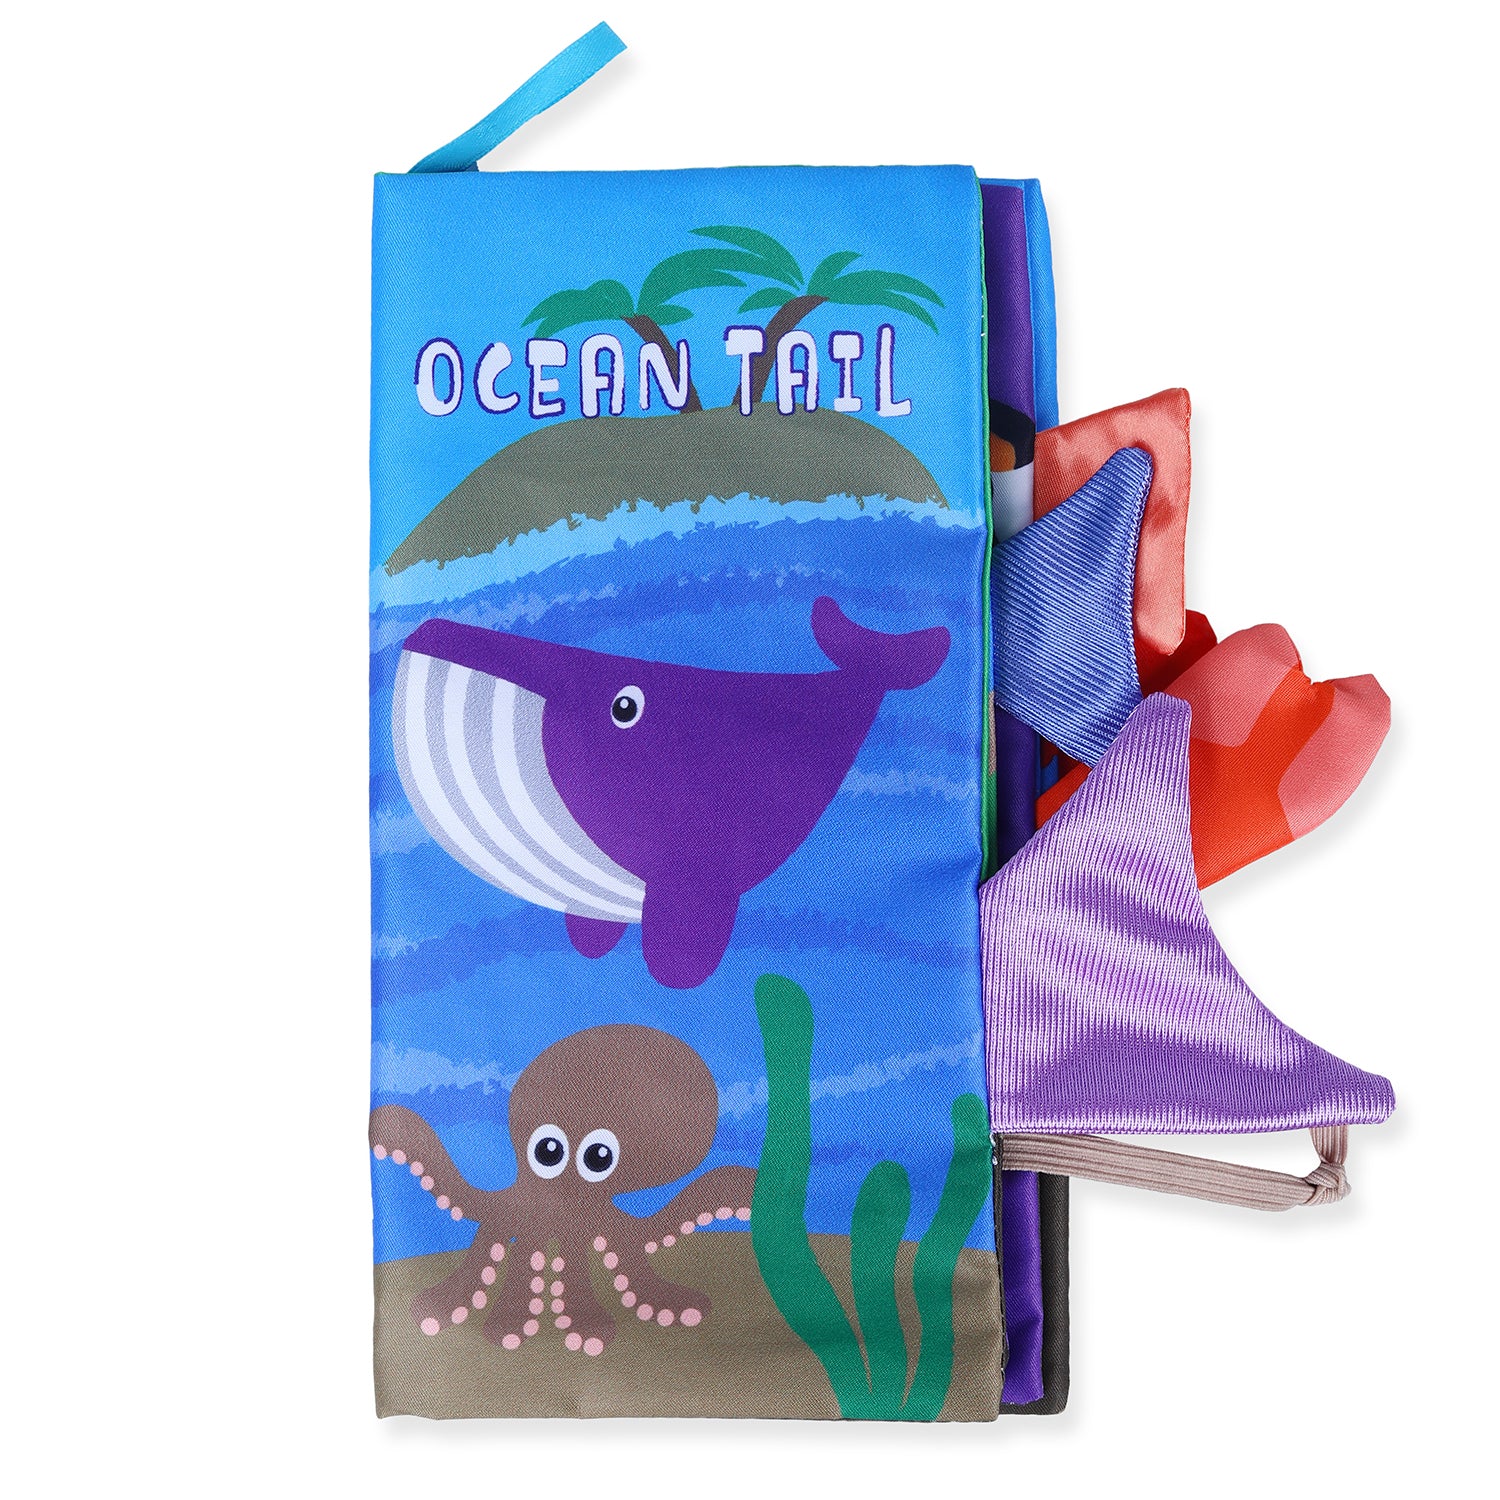 Ocean Tail Early Children Sensory Development Interactive 3D Cloth Book With Rustle Paper - Multicolour